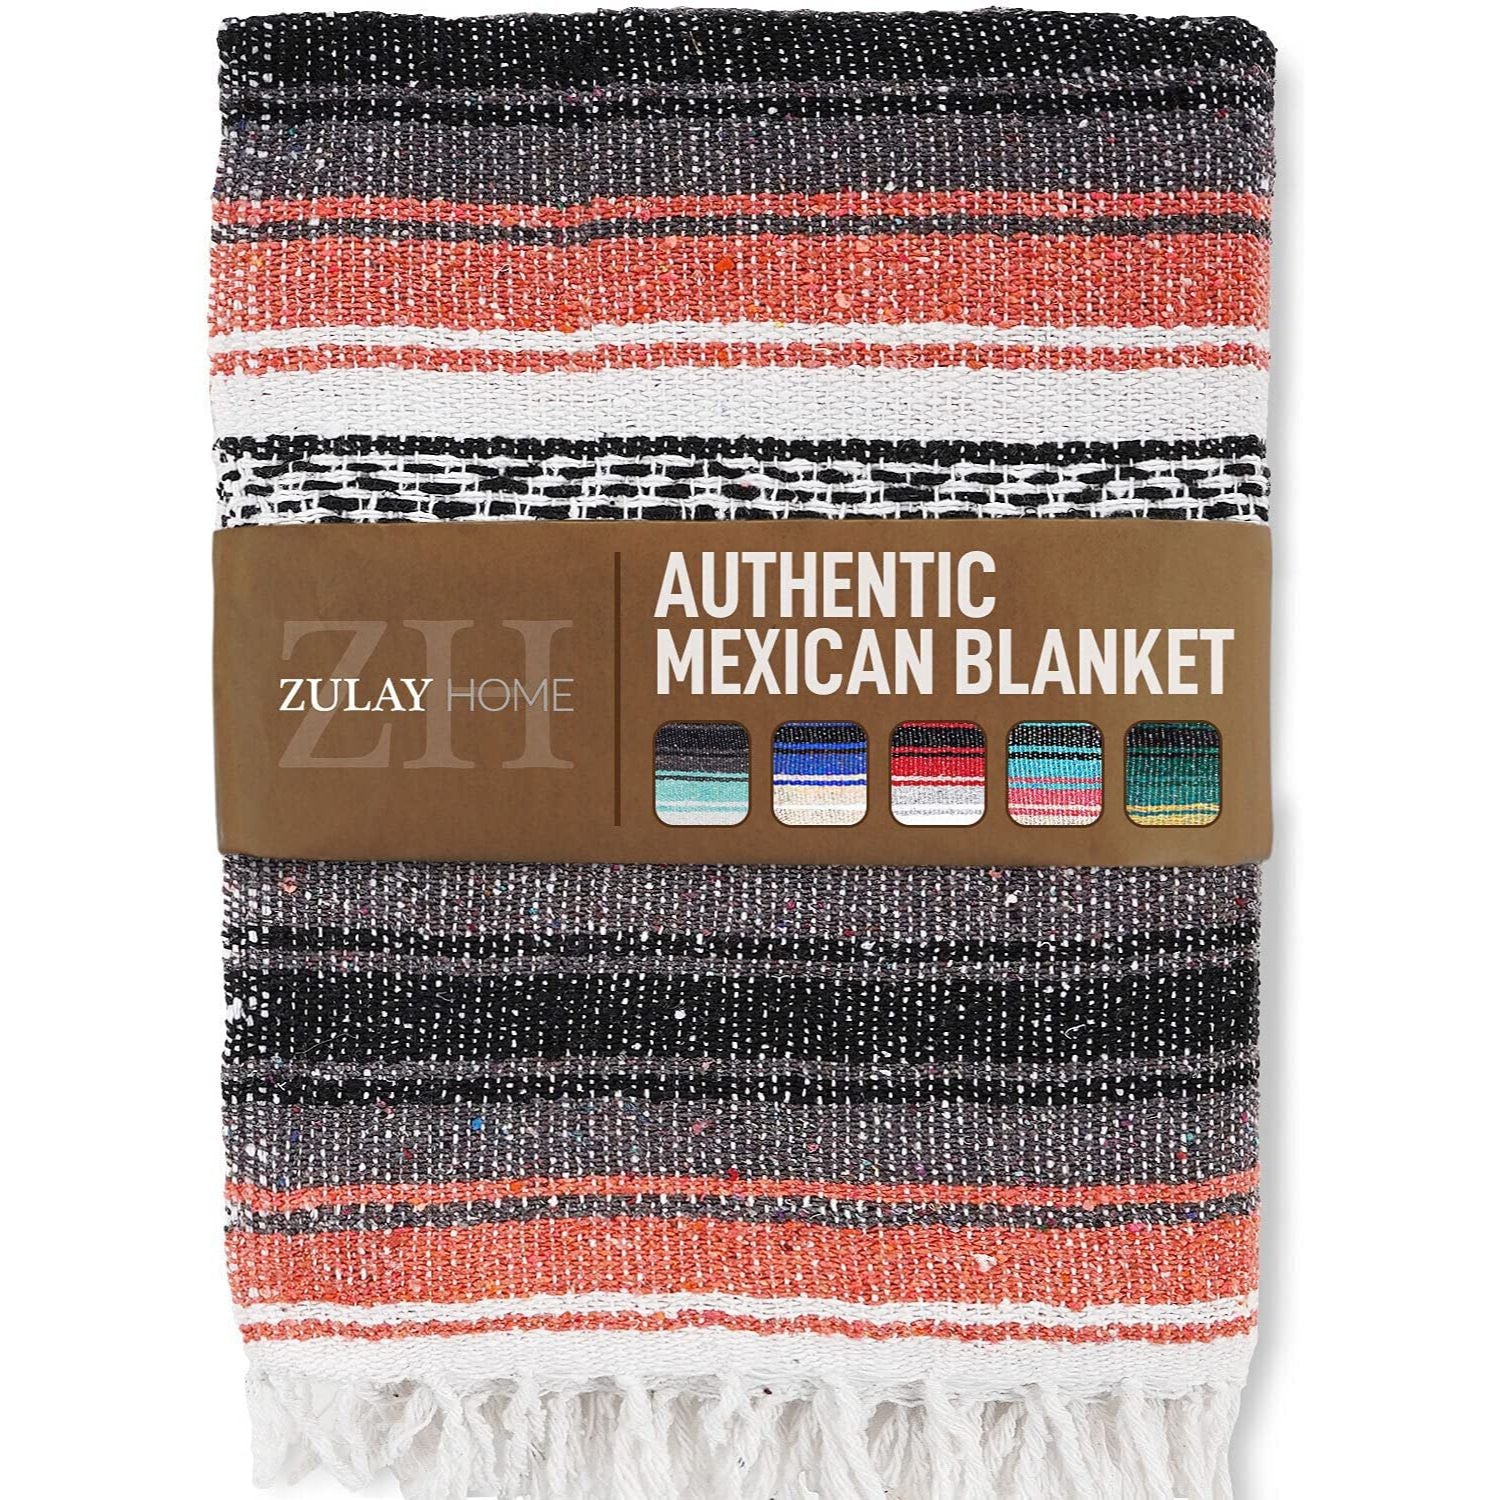 Zulay Home Authentic Mexican Blankets - Hand Woven Yoga Blanket & Outdoor Blanket